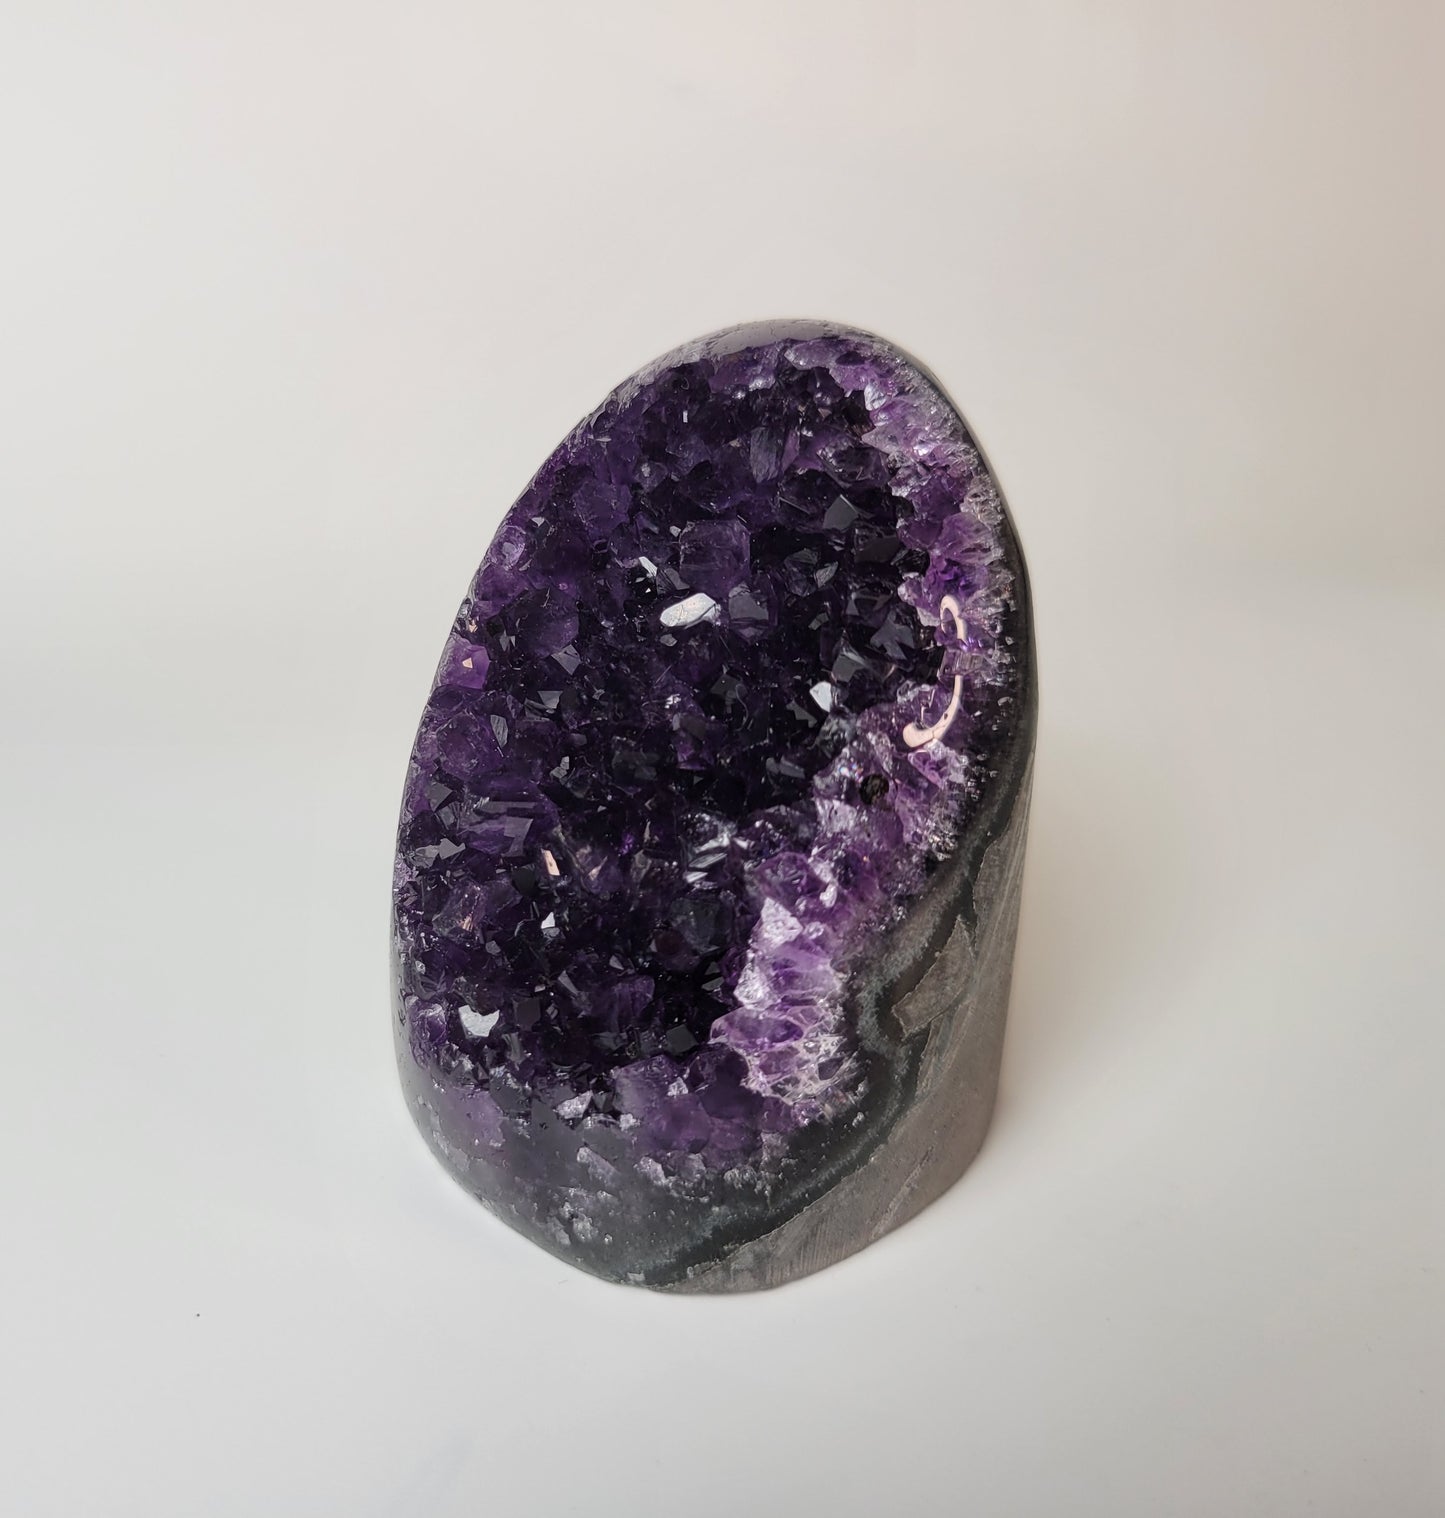 Grape Amethyst Cut Base from Uruguay, Partially Polished (W 1 7/8 X D 2 X H 2 5/8 inches)